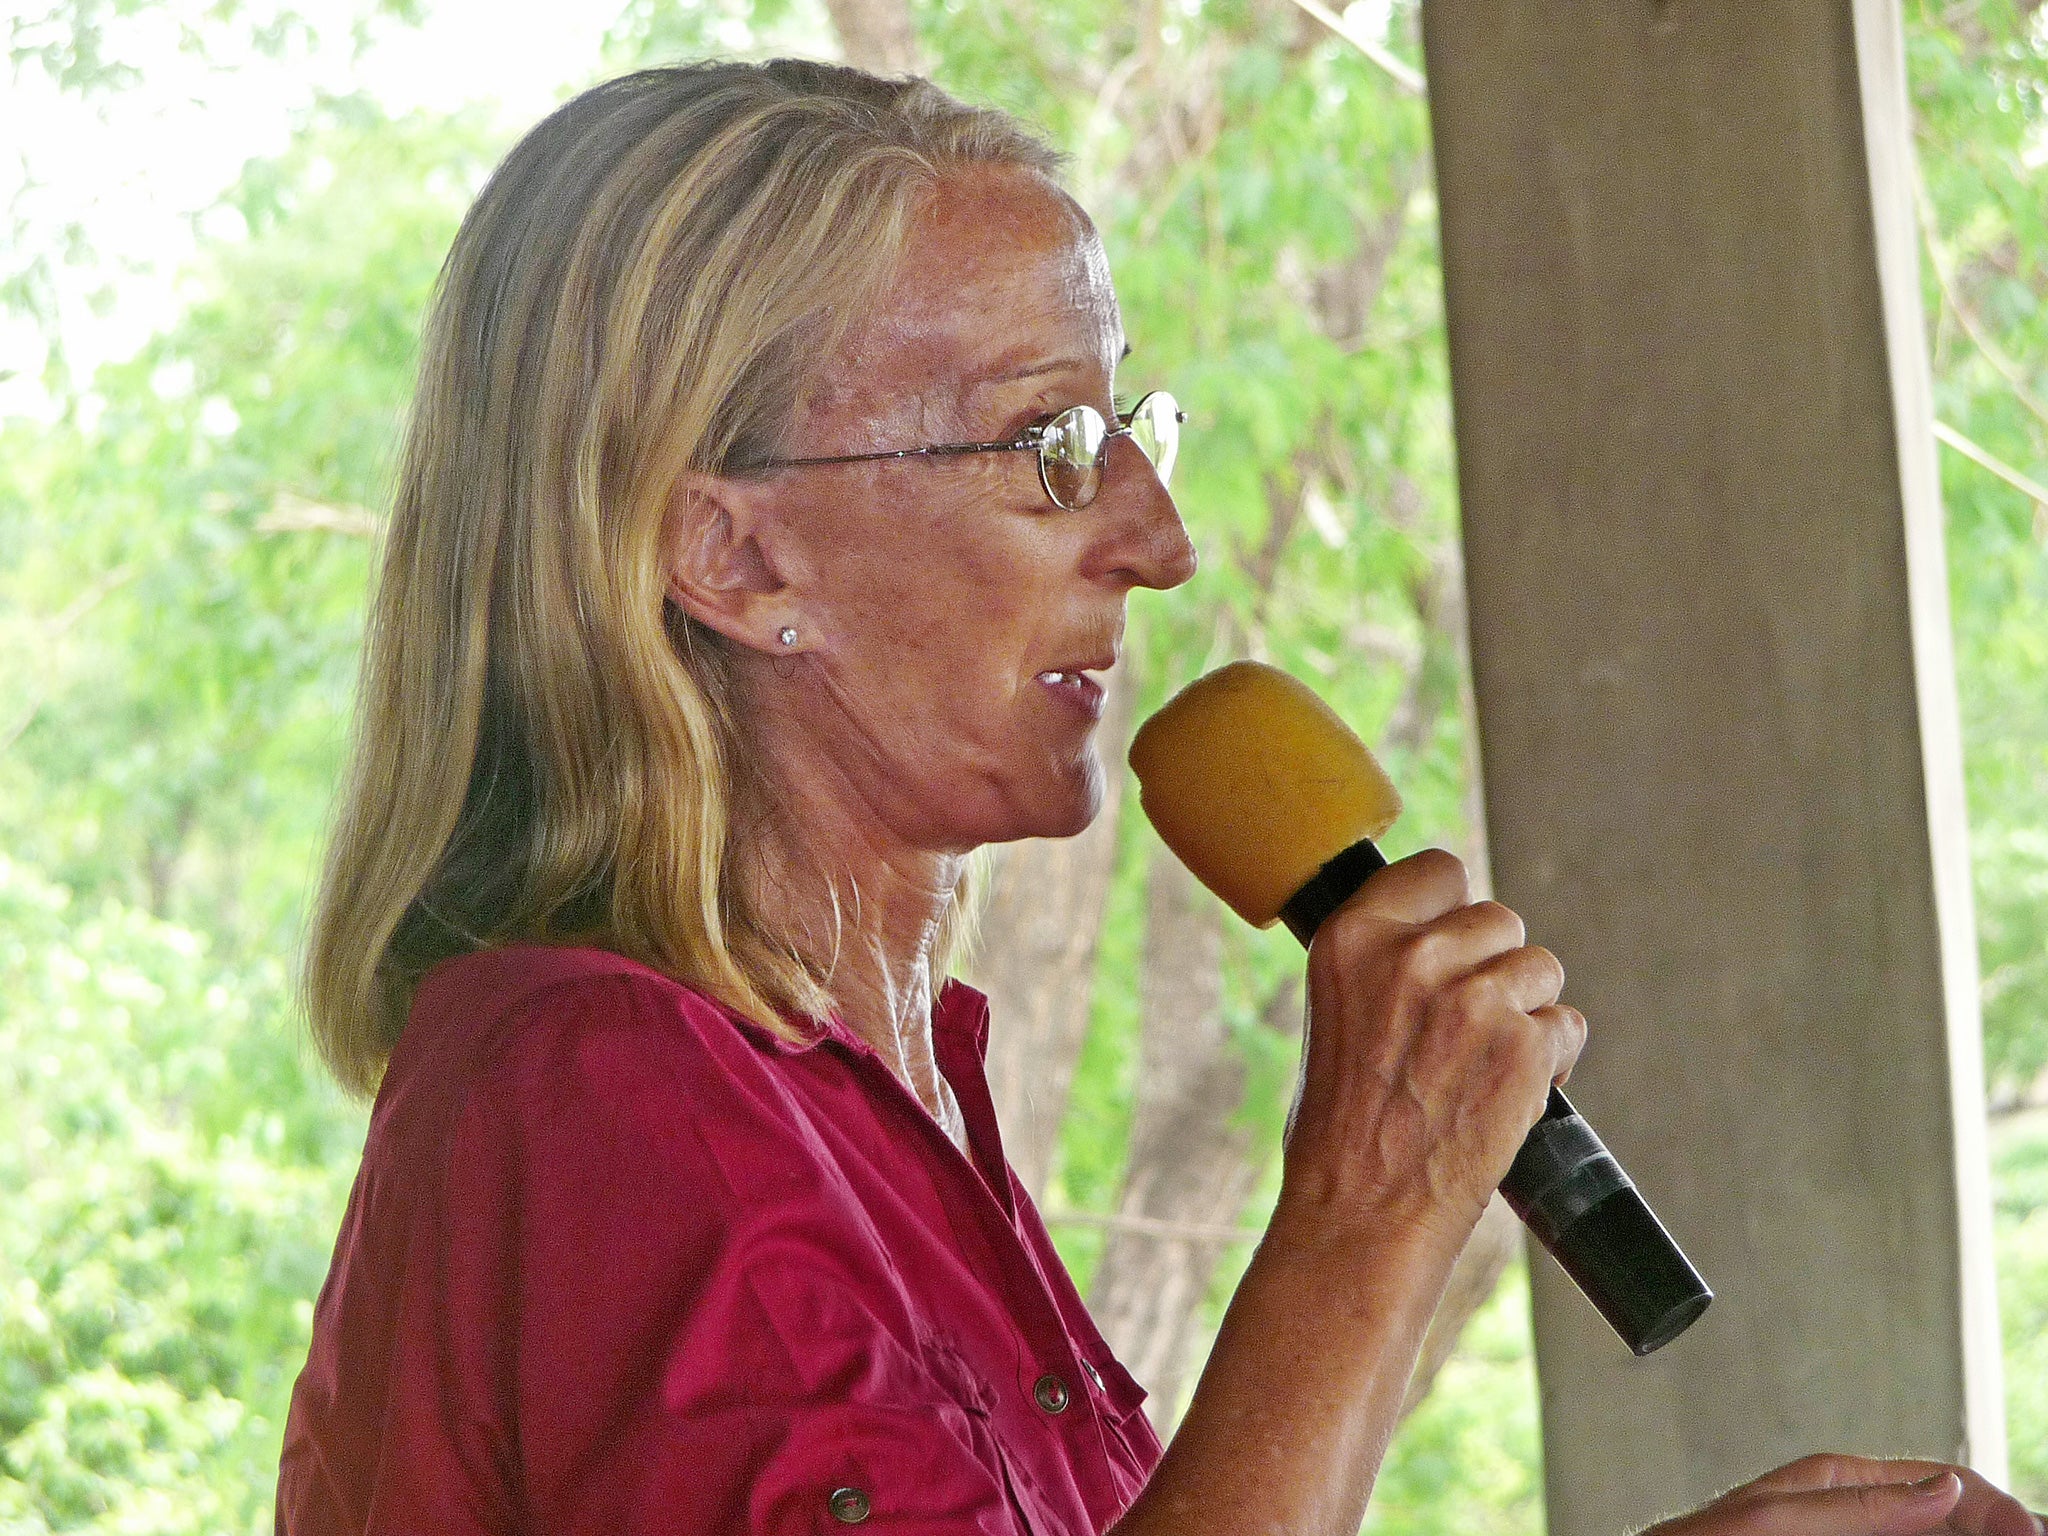 Phyllis Sortor, an American missionary kidnapped in Nigeria, has been released